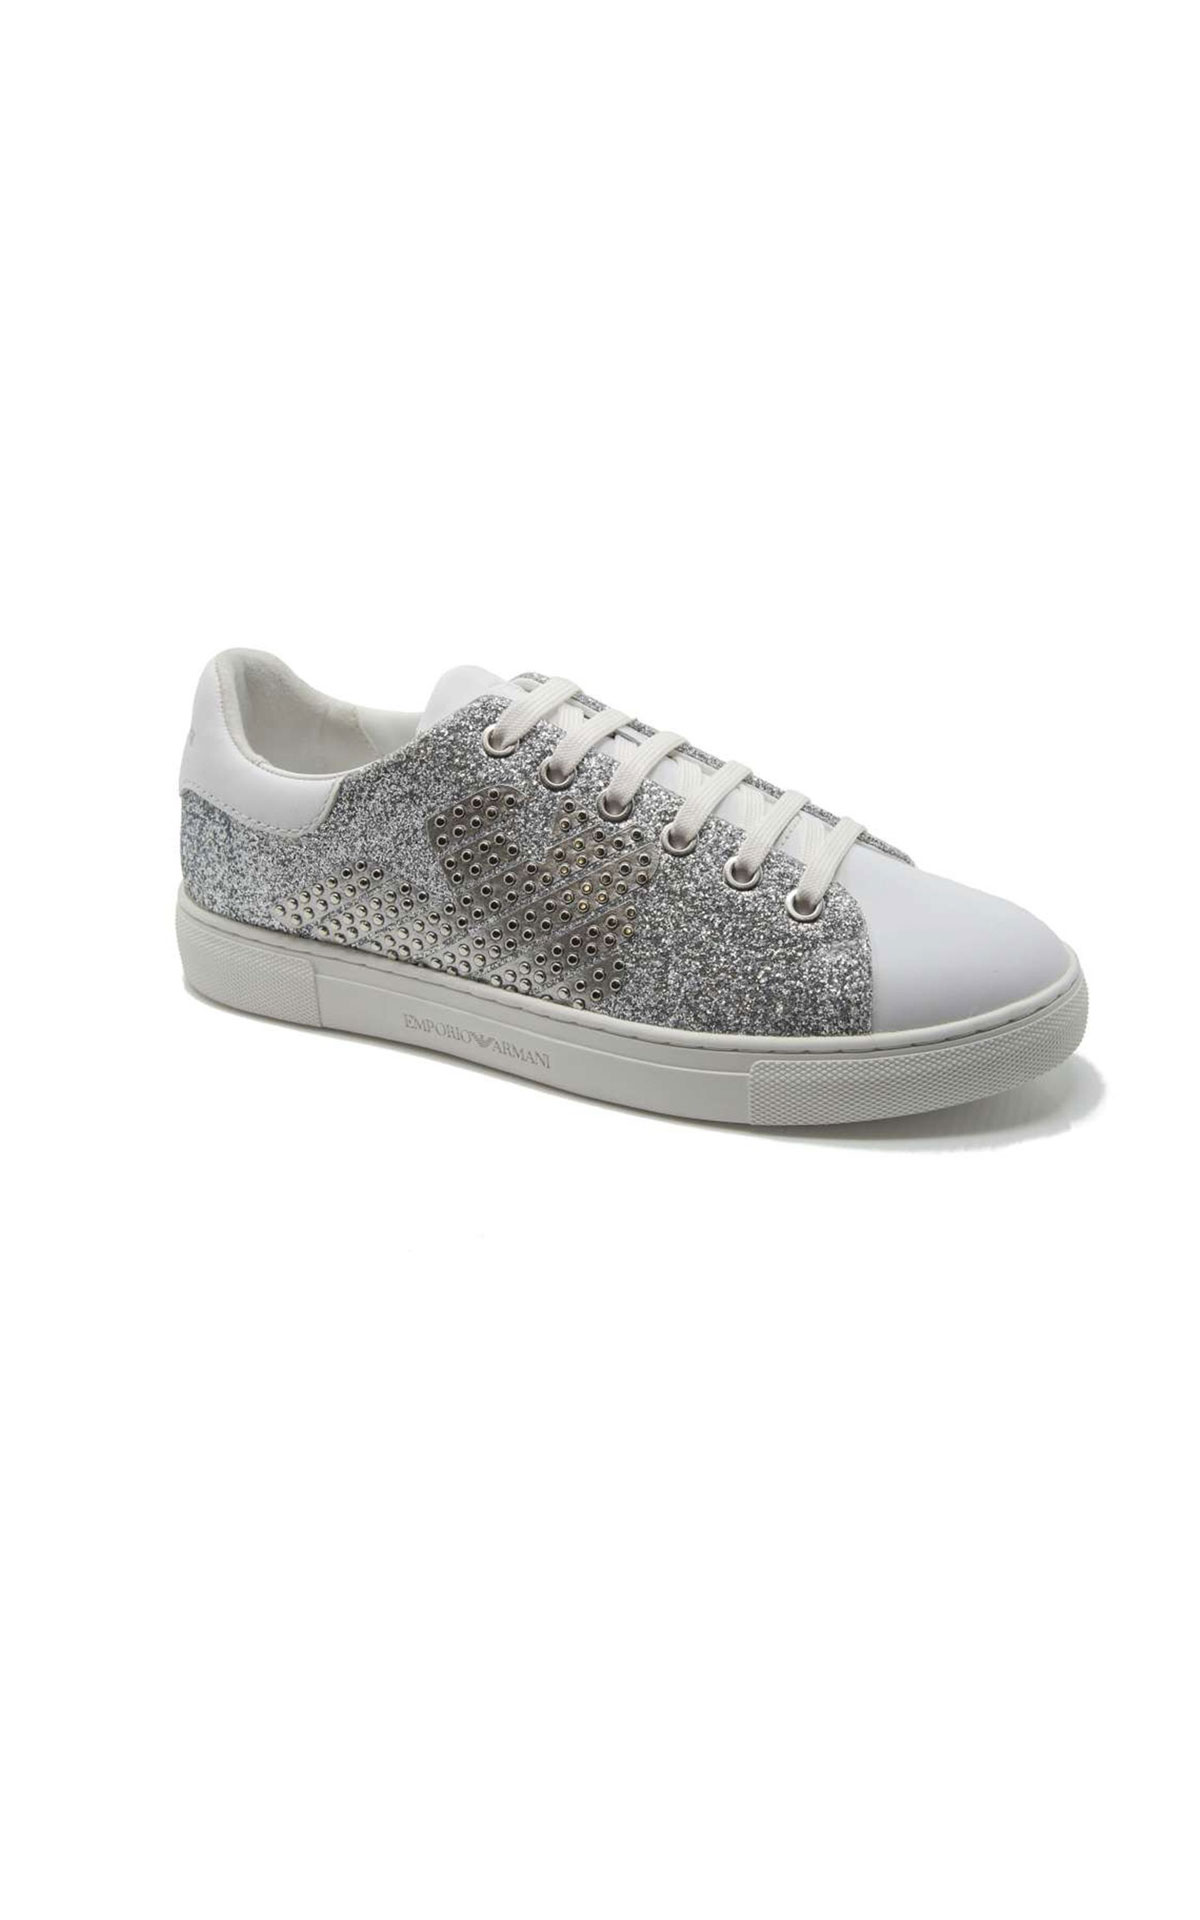 Armani Ladies sneaker from Bicester Village